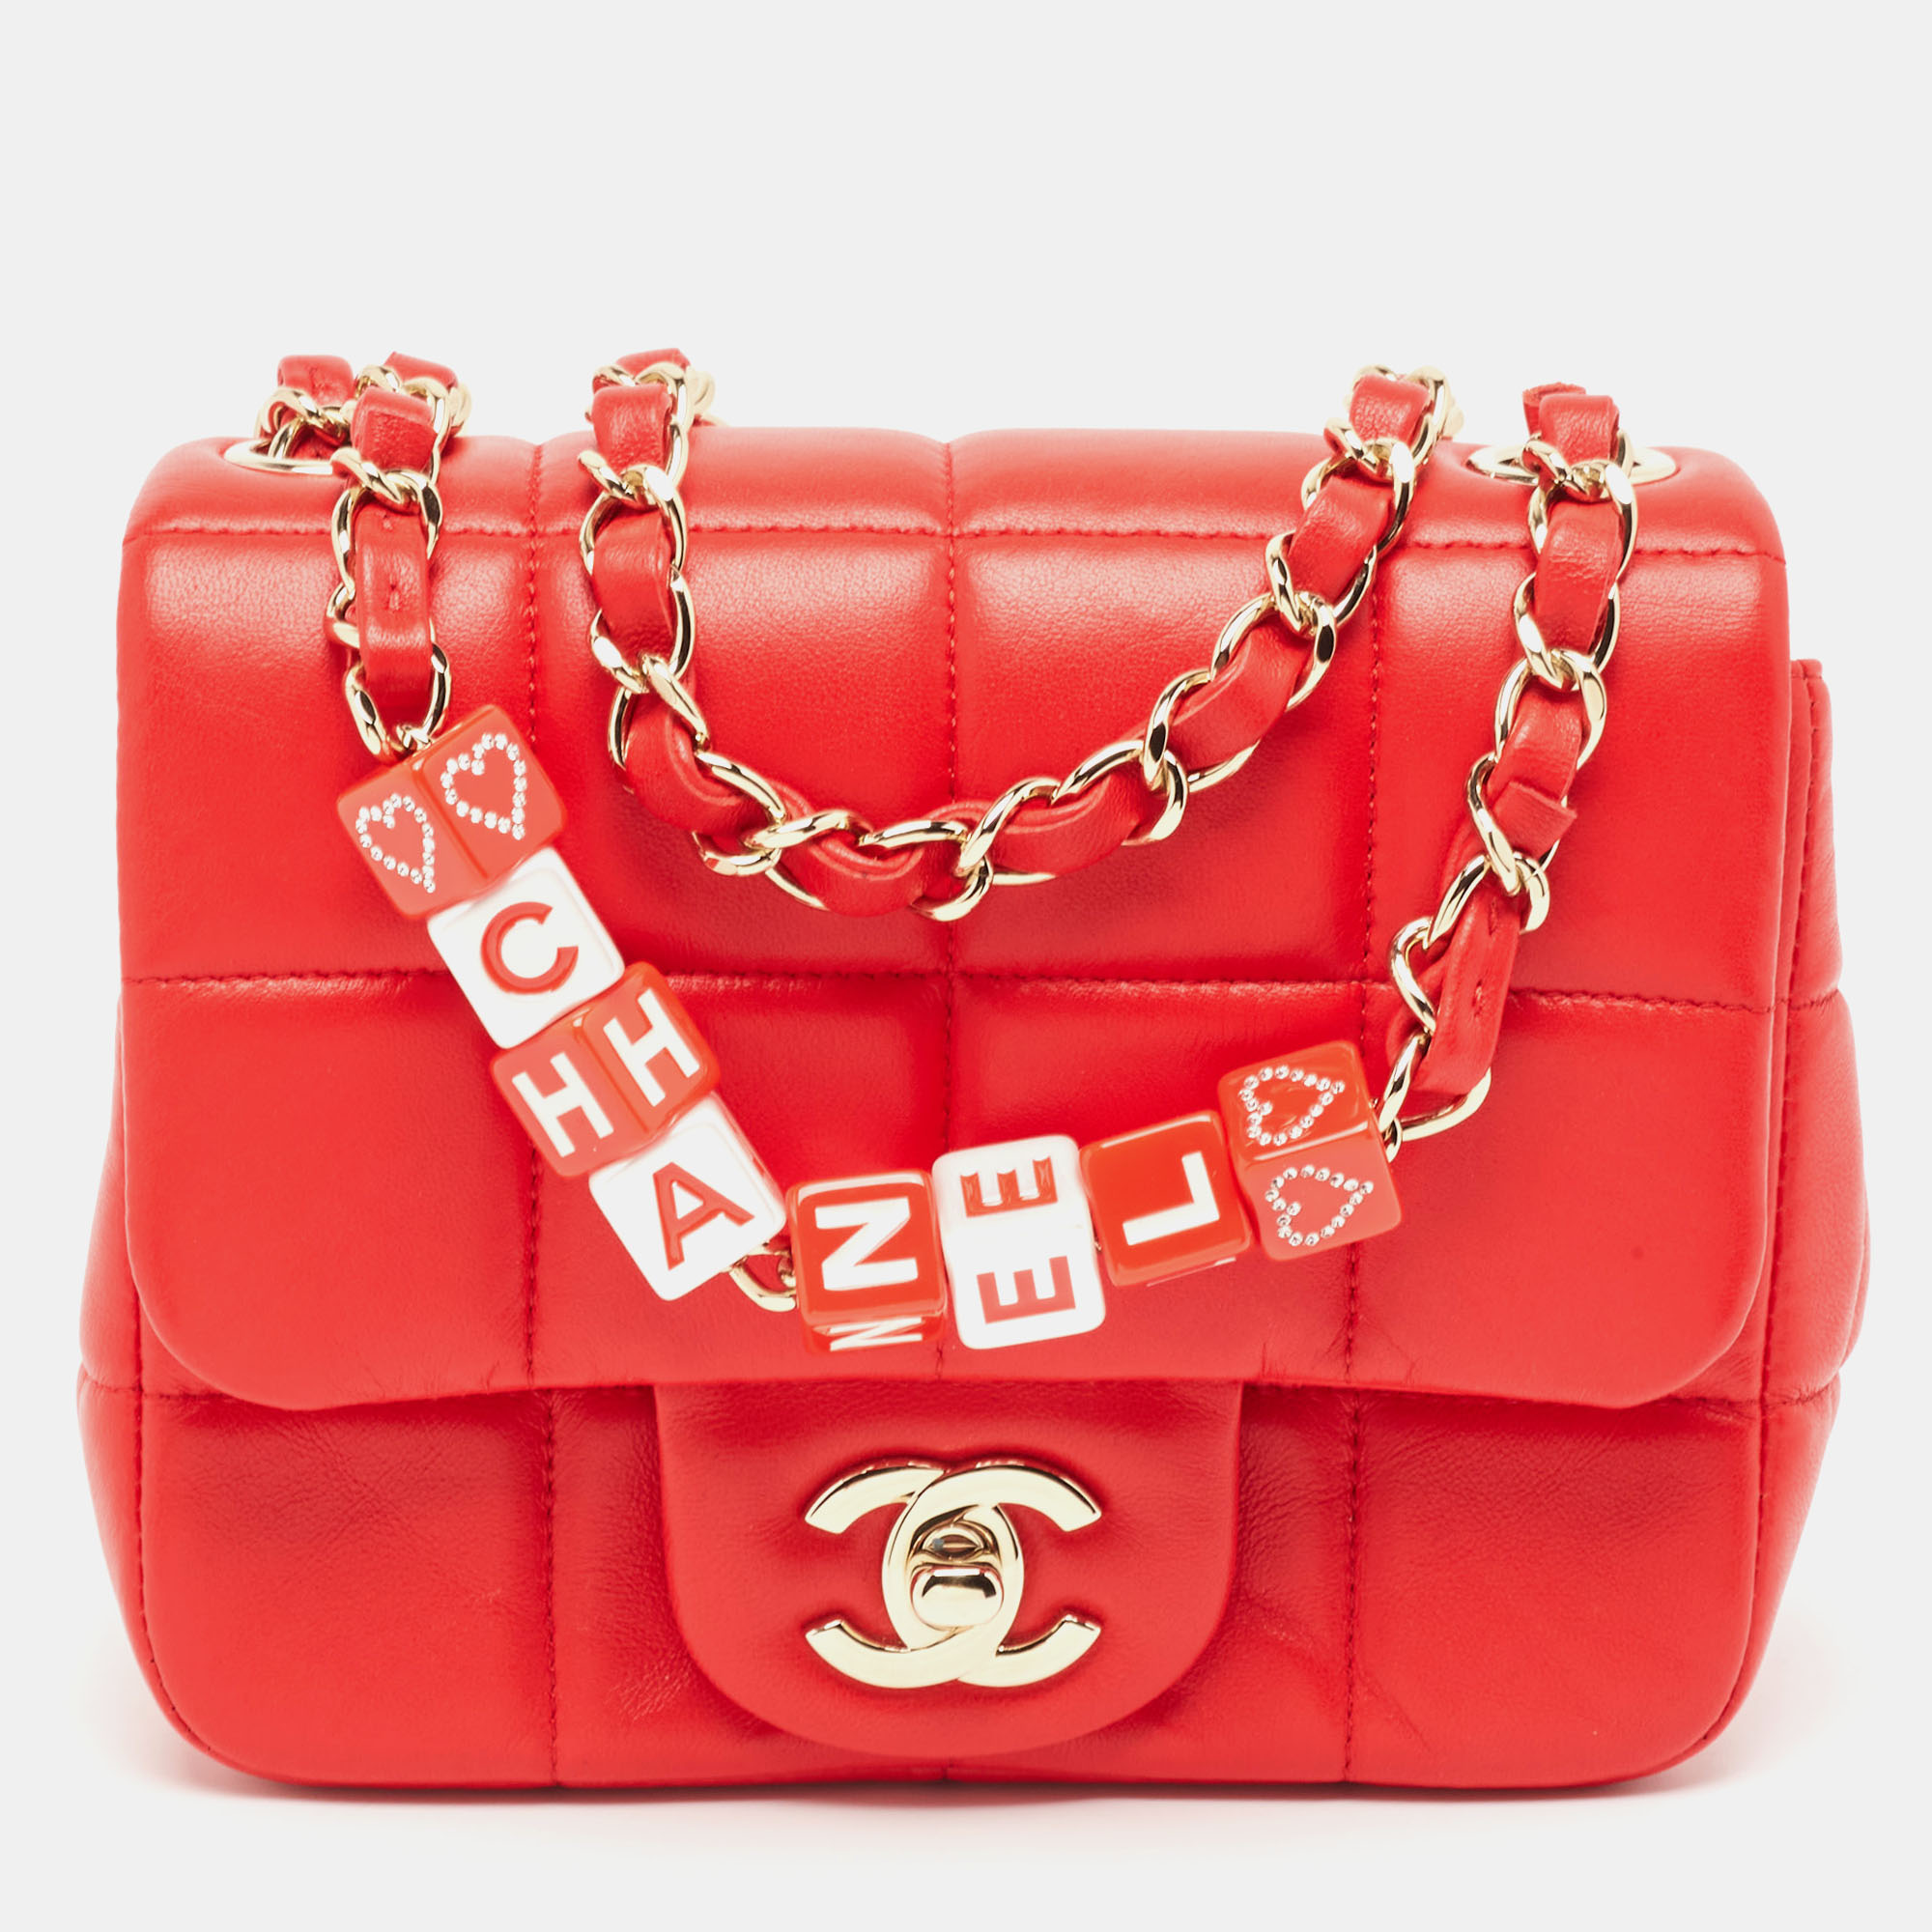 Crafted from luxurious red quilted leather the Chanel Monacoco flap bag exudes timeless elegance. Its compact design features the iconic CC turn lock closure and a delicate chain strap with brand details offering both style and functionality. Elevate any outfit with this exquisite accessory a symbol of refined taste and sophistication.